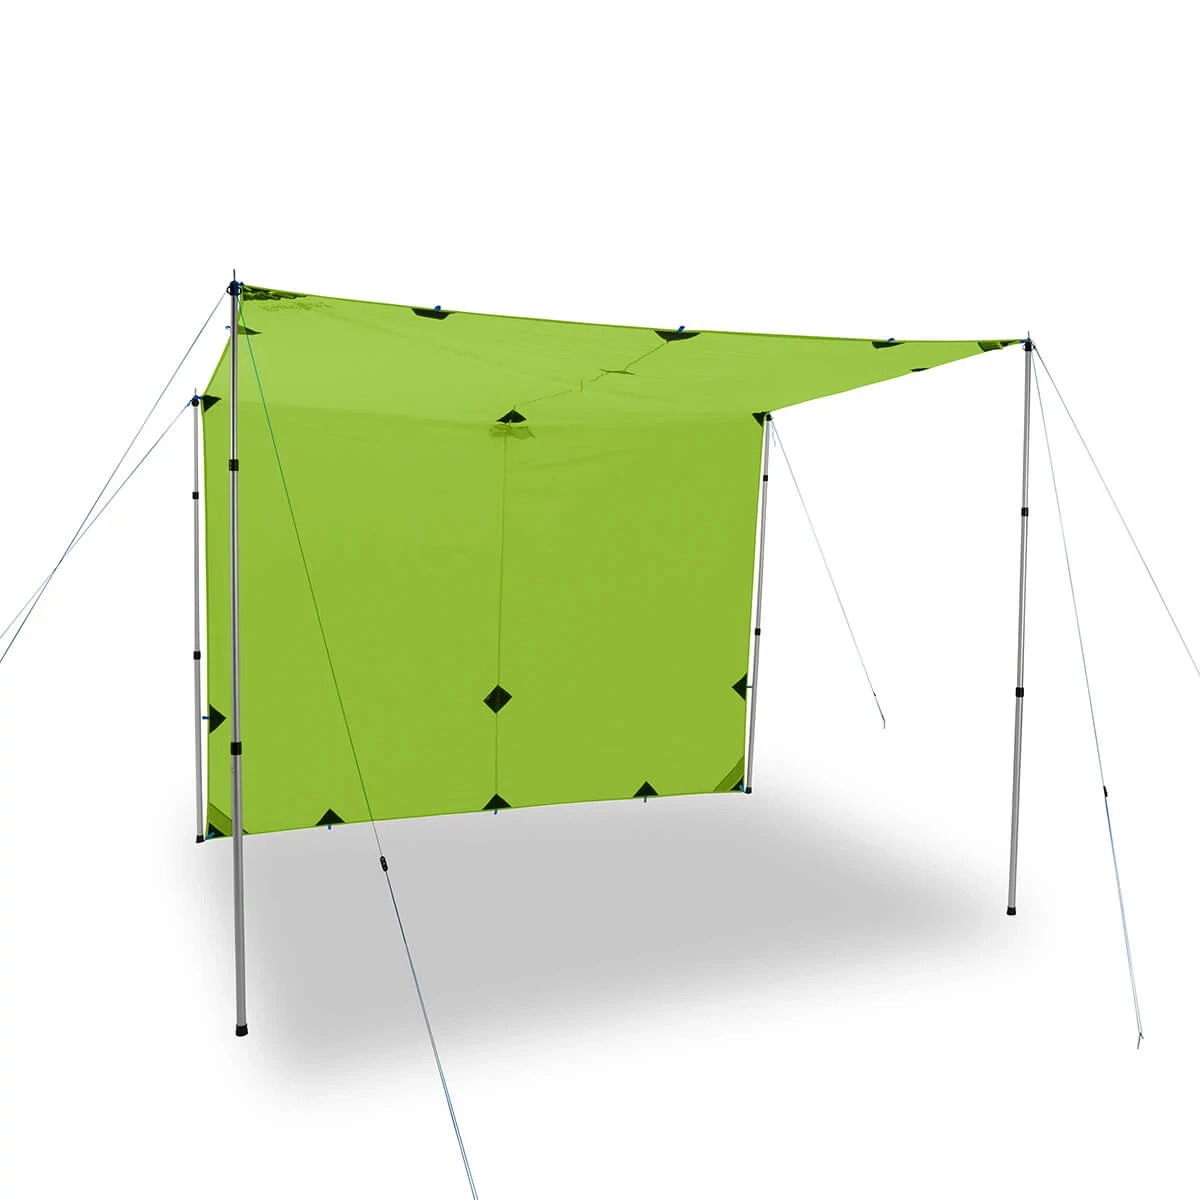 Trail Fly pitch configuration option for wind protection and shade. Poles sold separately.